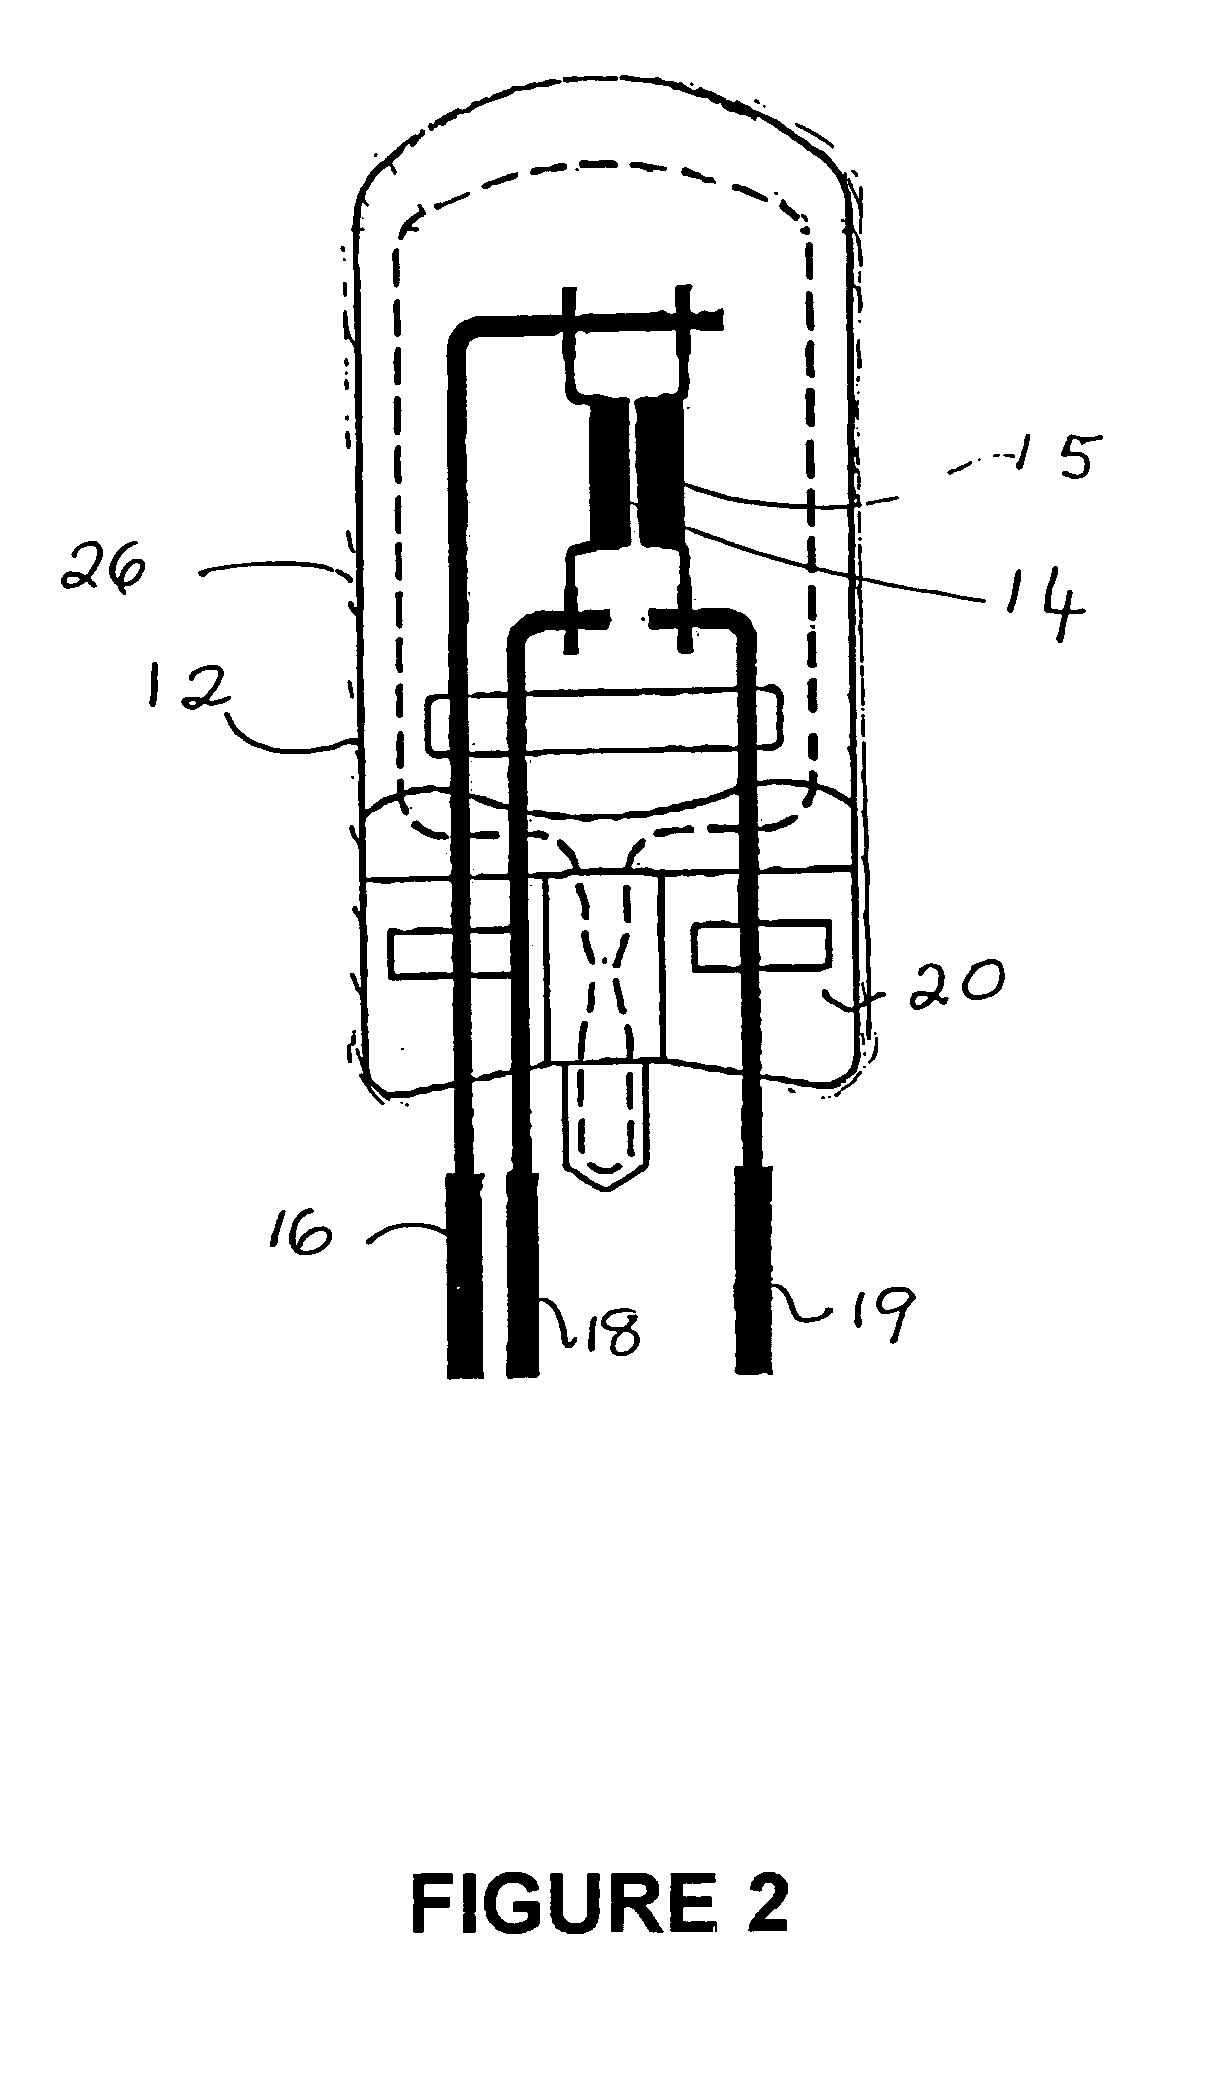 Tungsten halogen lamp with halogen-containing compound and silicon-containing compound